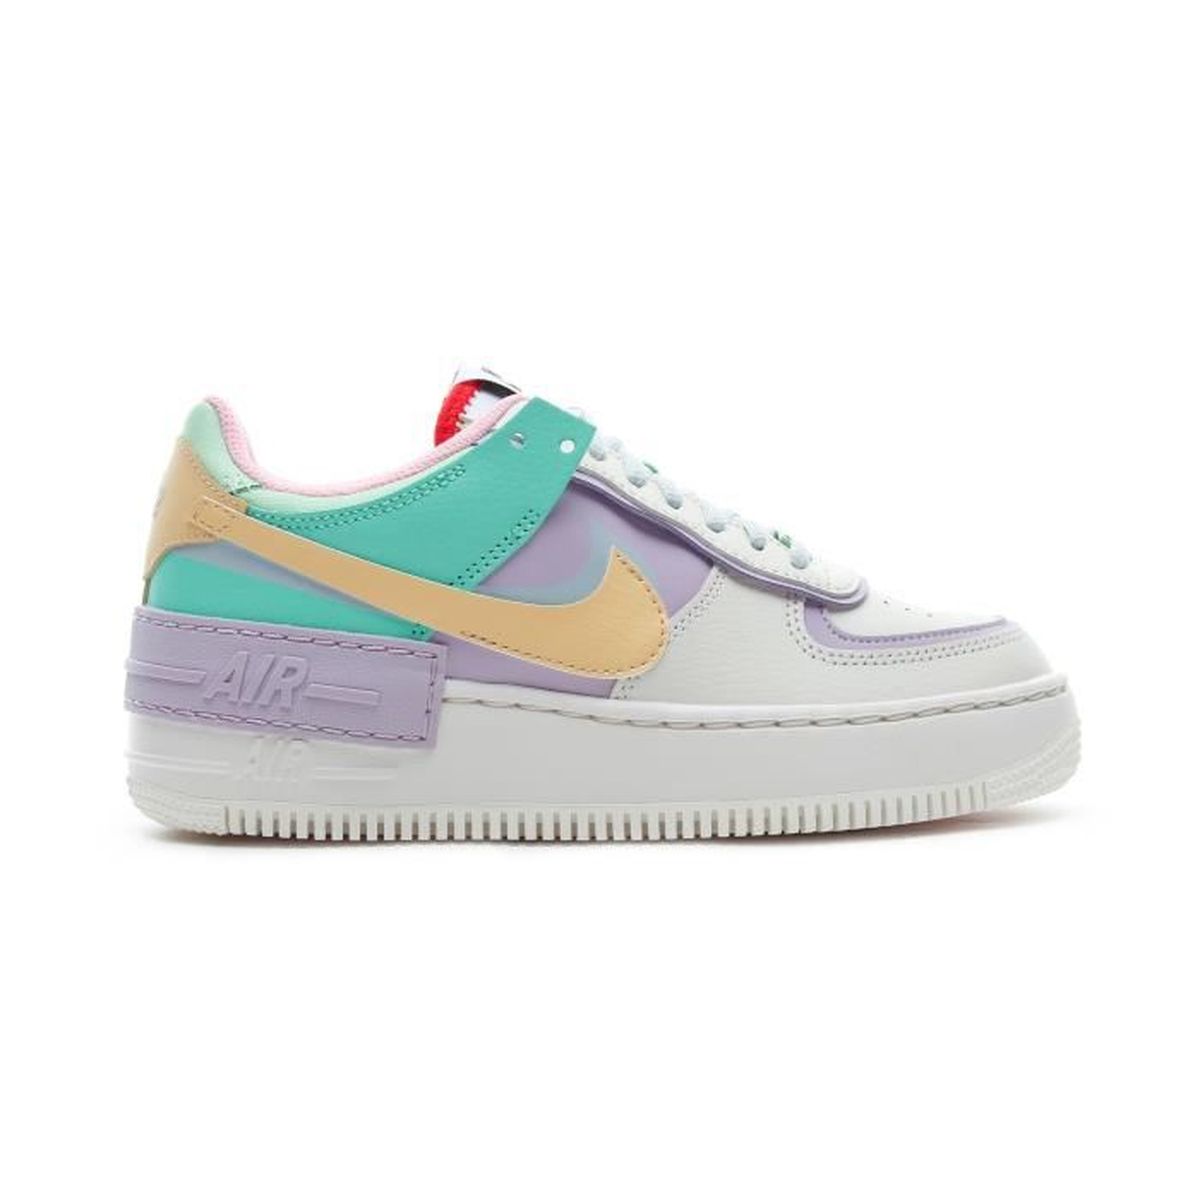 nike air force1 shadow pale ivory Off 64%